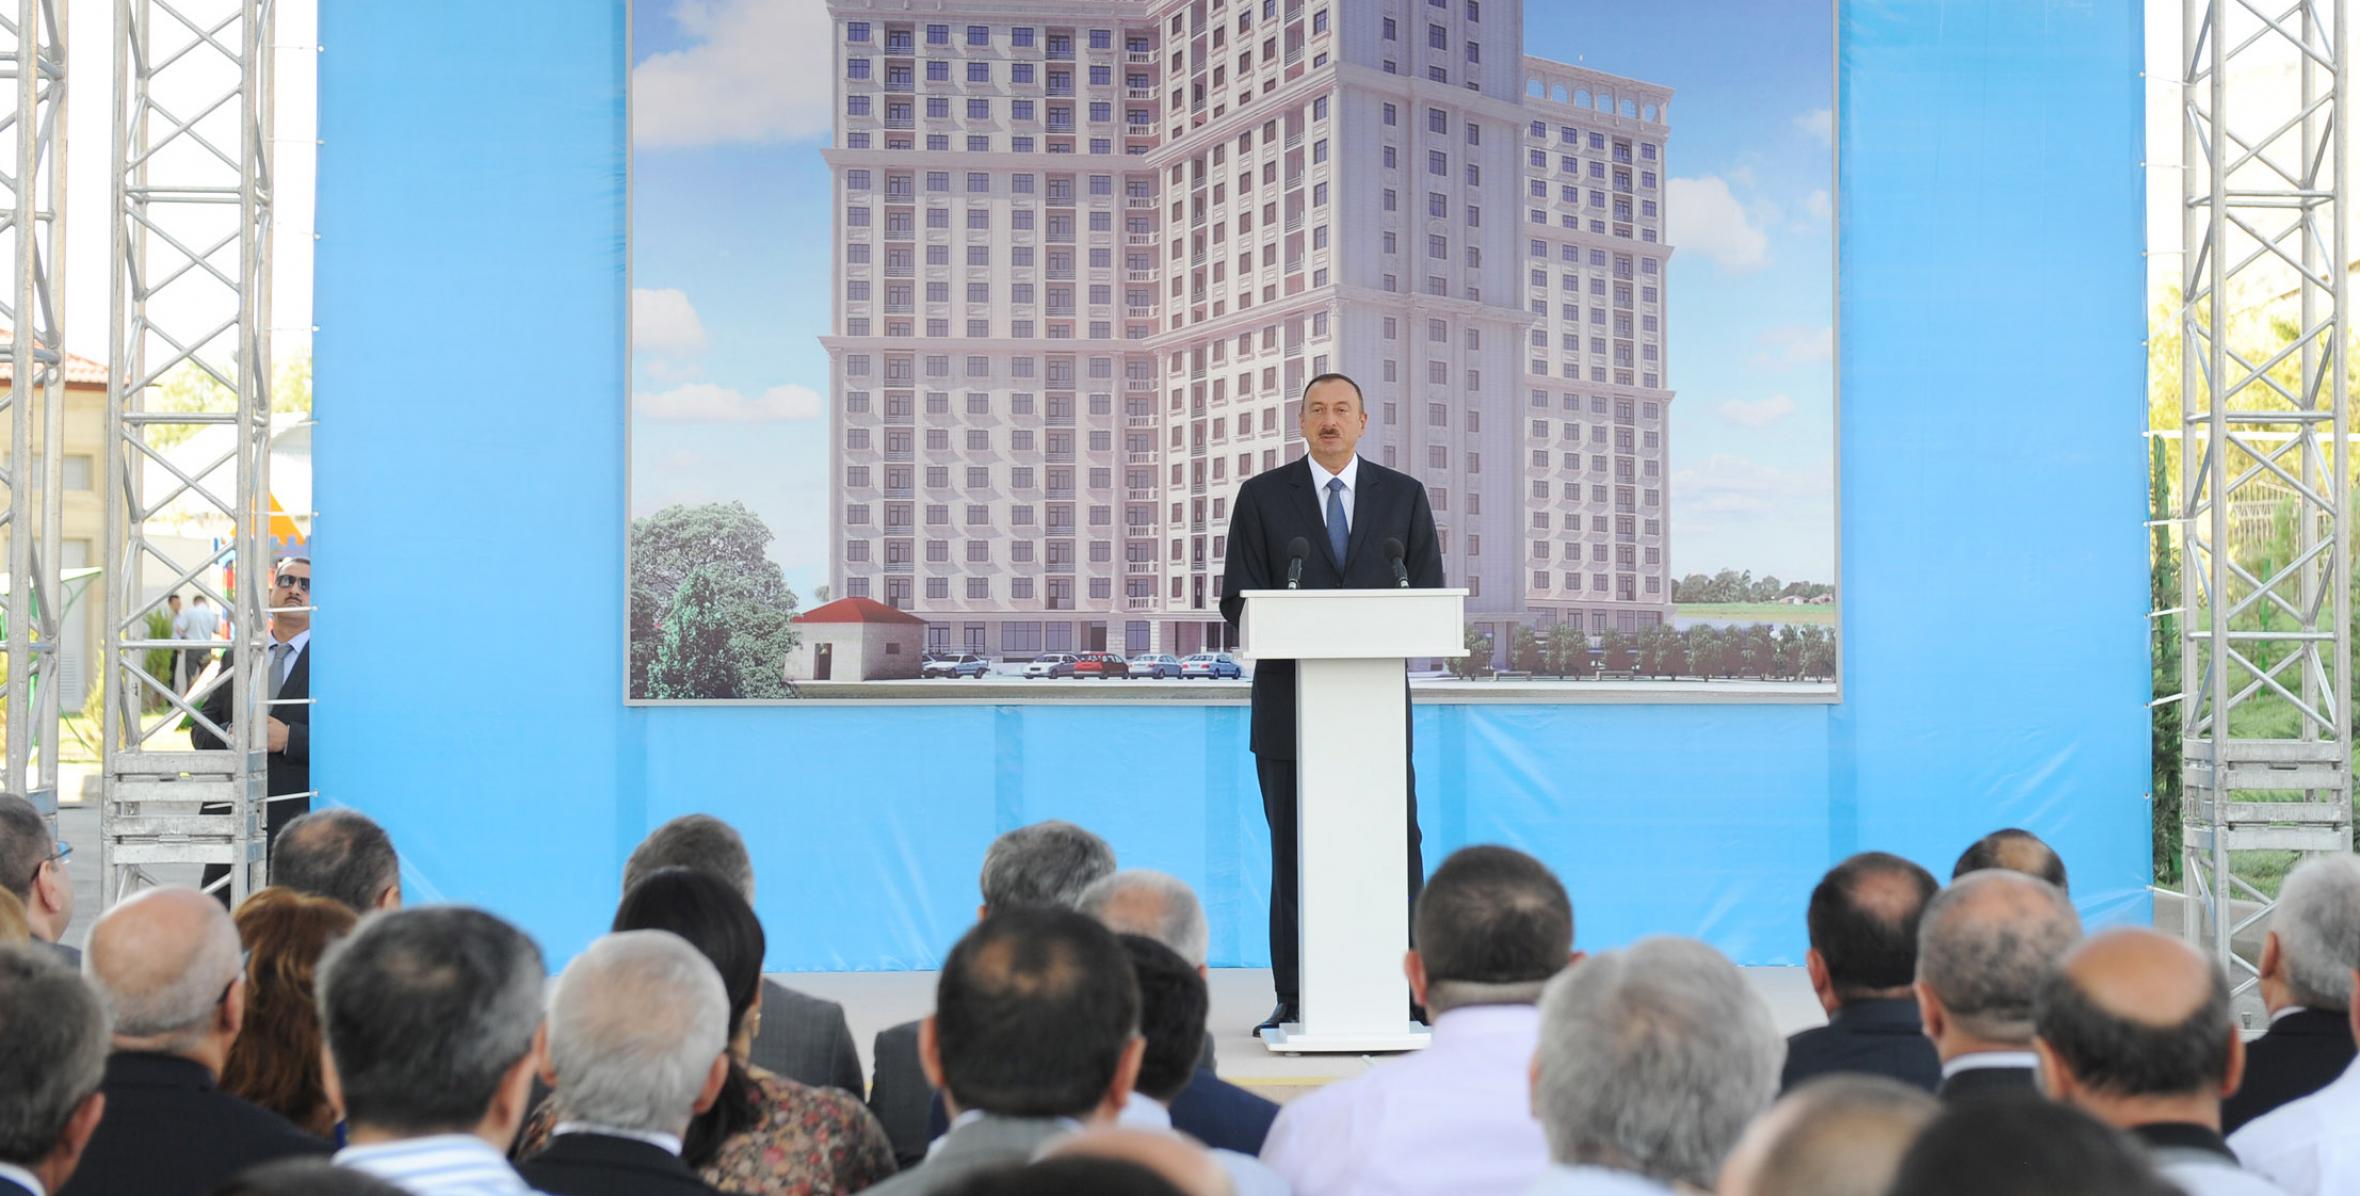 Ilham Aliyev attended a ceremony to distribute apartments in a building for journalists